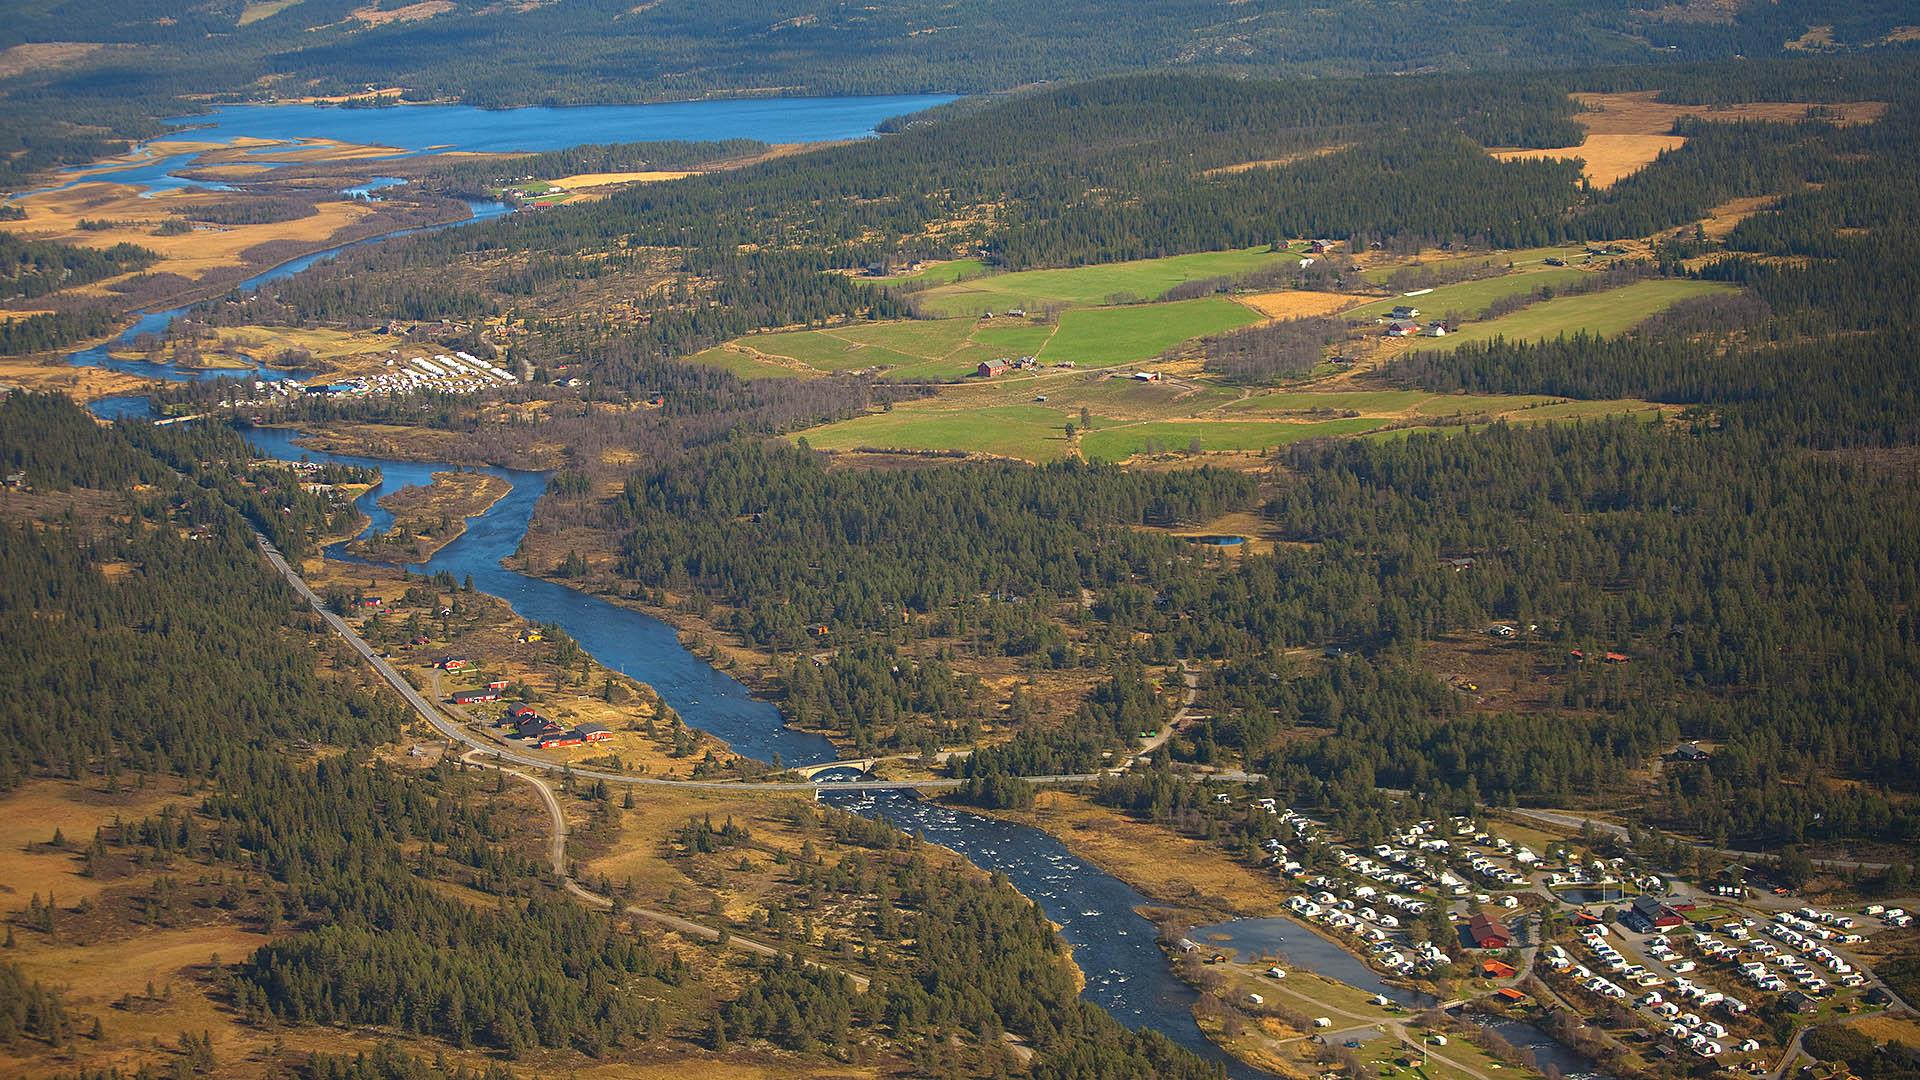 Aerial image that shows a broad valley bottom with a river running past a campground, som freost patches and some green fields. A lake in the background. Summer.